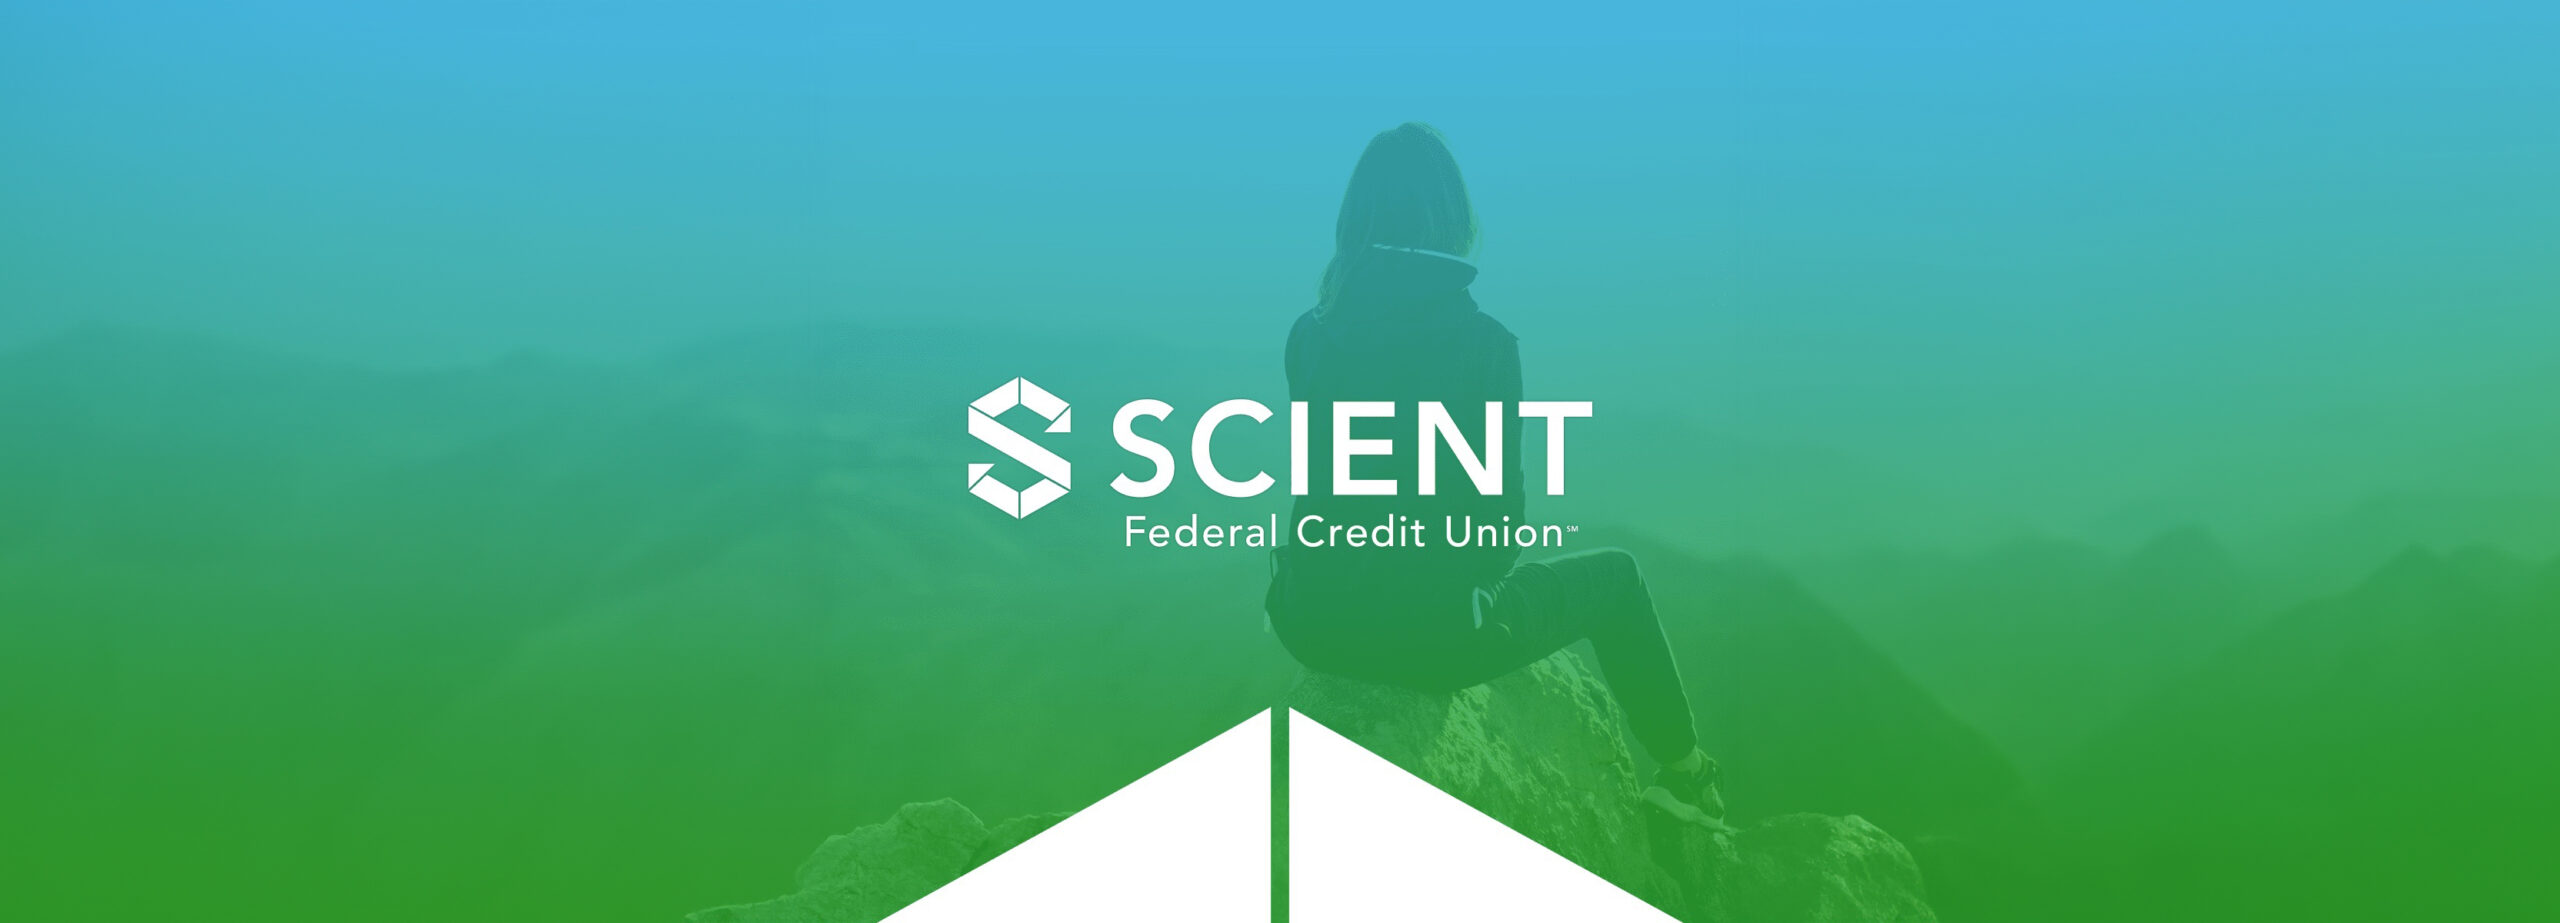 Scient Federal Credit Union’s CEO Chris Maynard Reflects on Longstanding, Successful Partnership with Samaha & Associates